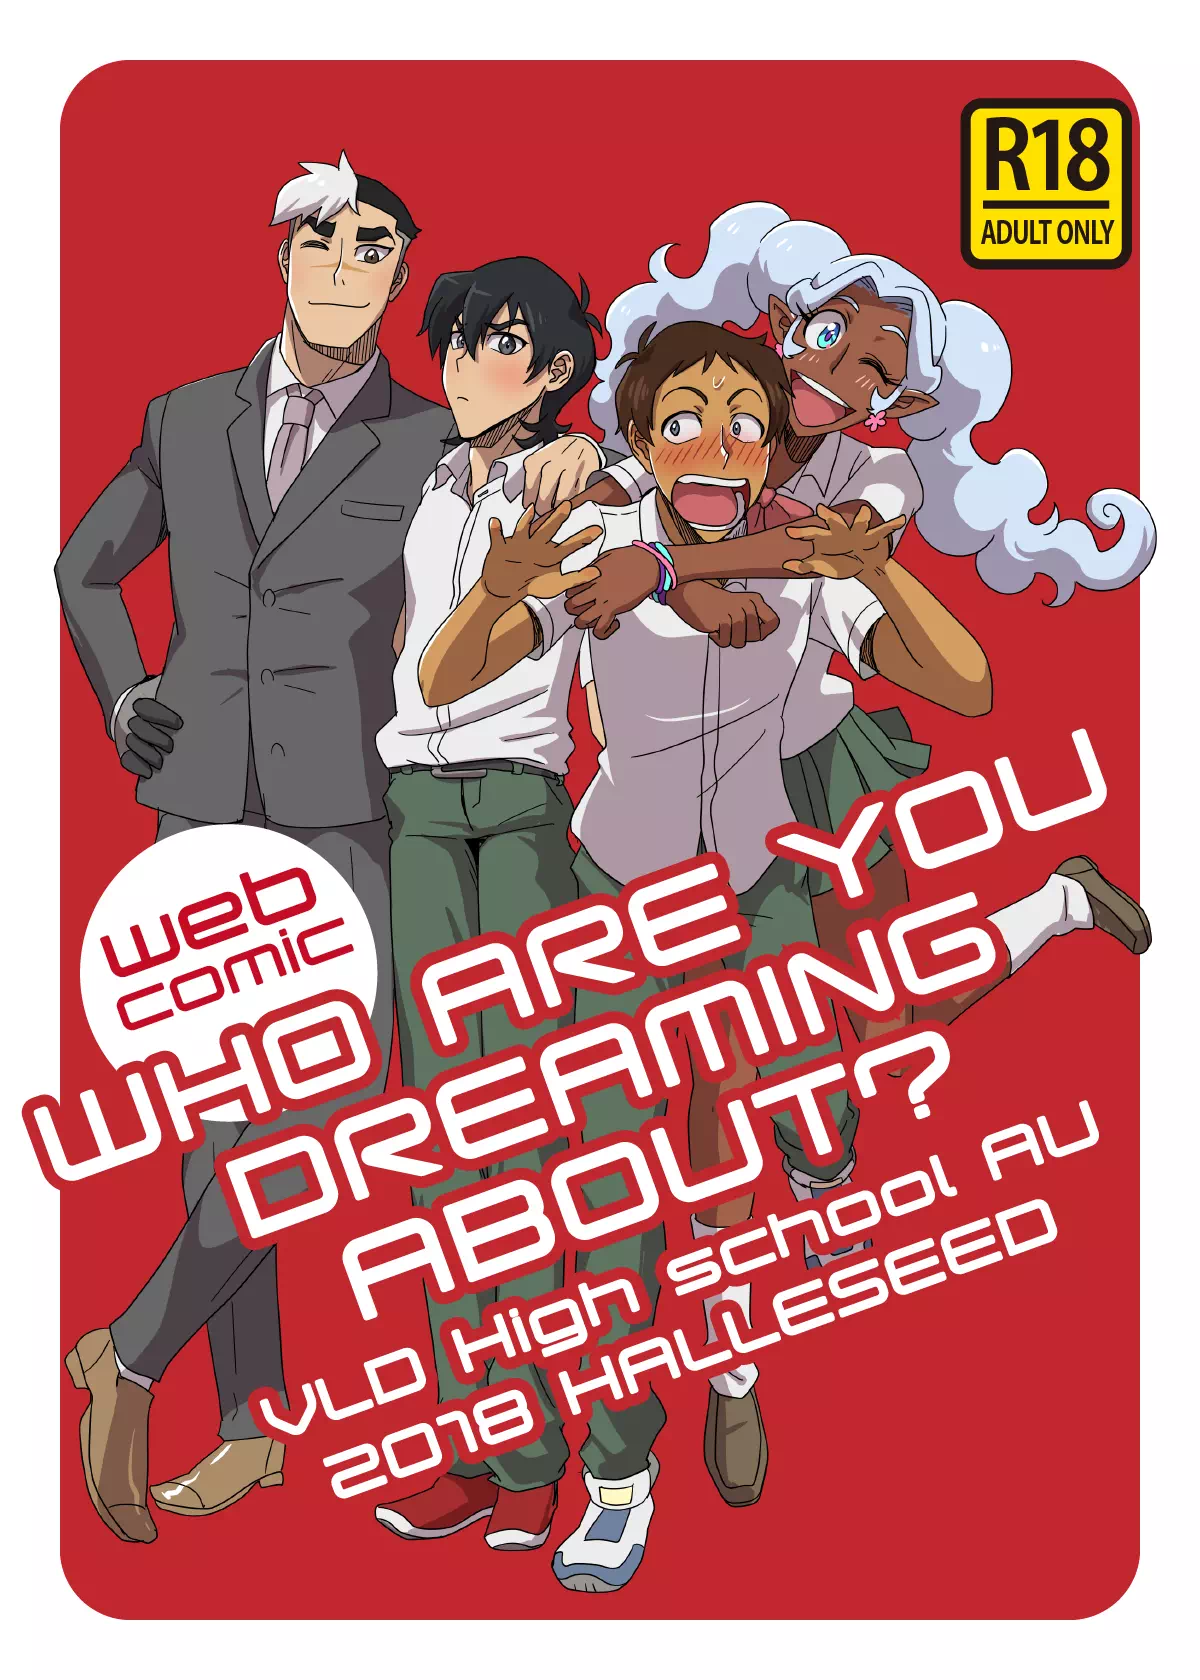 Yaoi porn comics Voltron: Legendary Defender – High School AU: Who are you dreaming about?